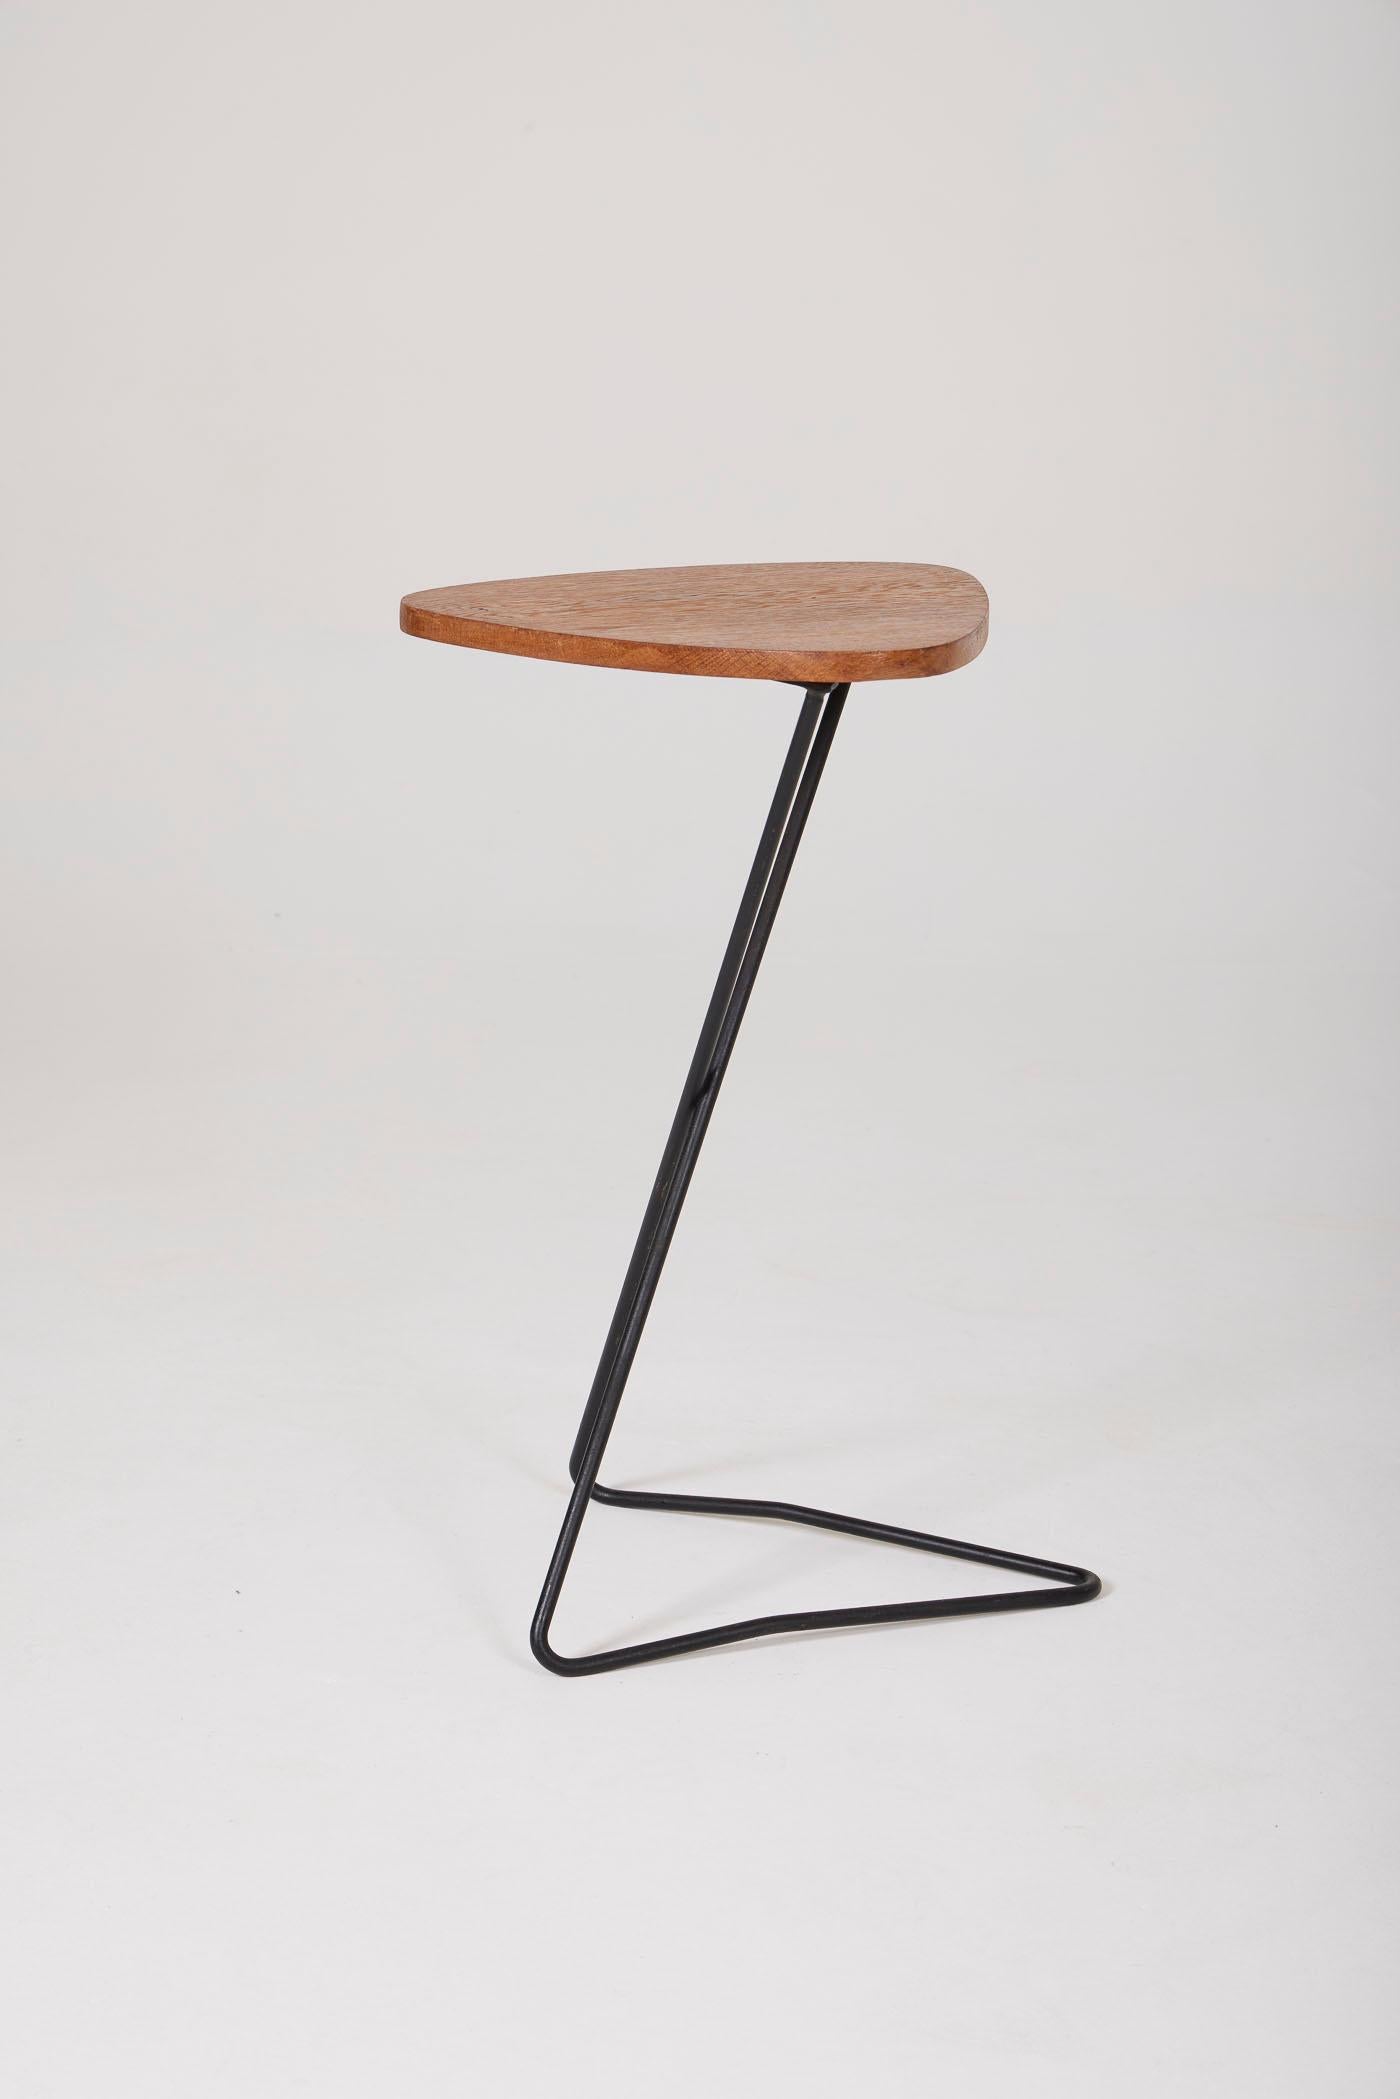 20th Century Wooden side table